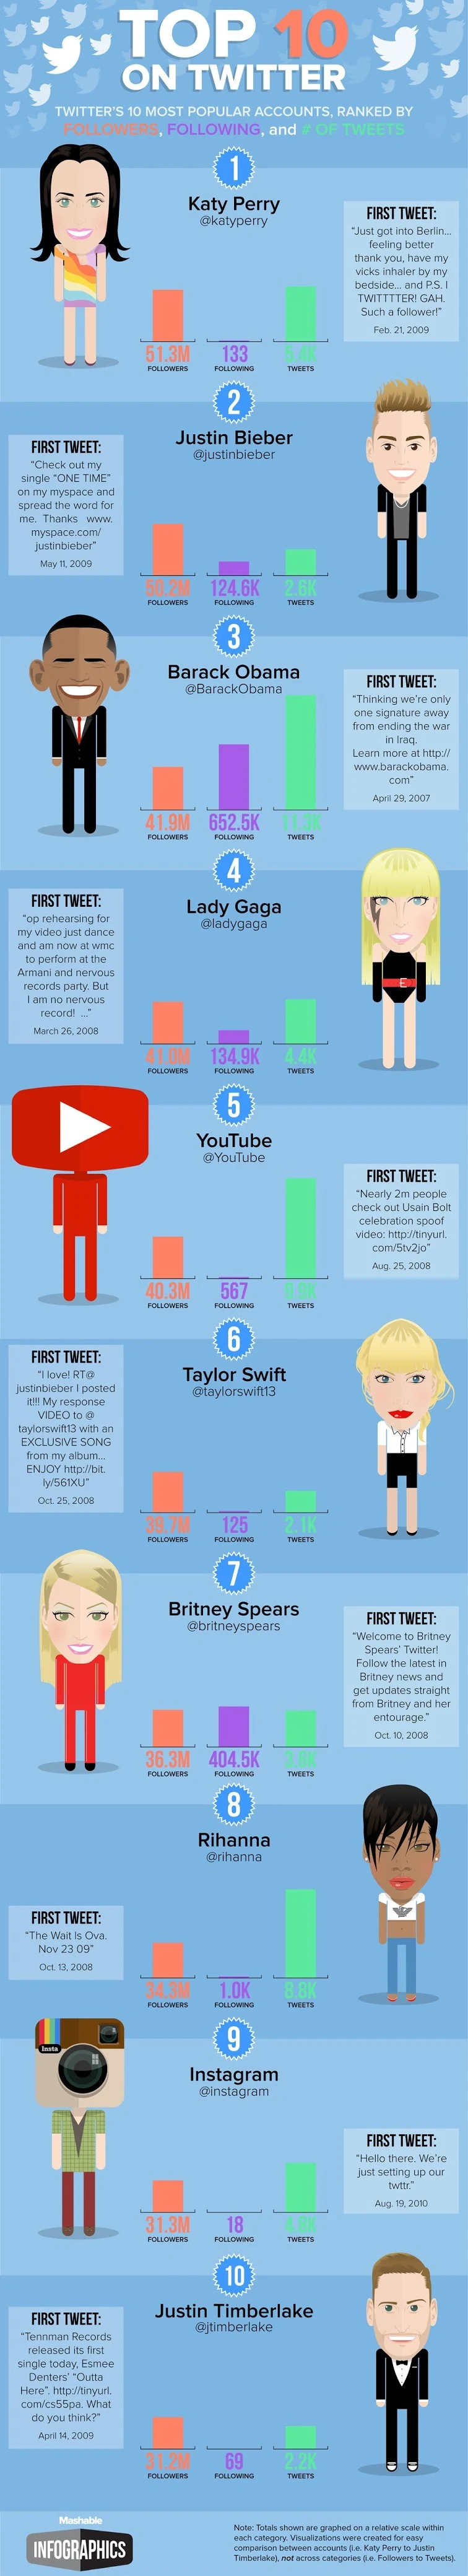 The Top 10 Most-Followed Twitter Accounts 2014 - infographic